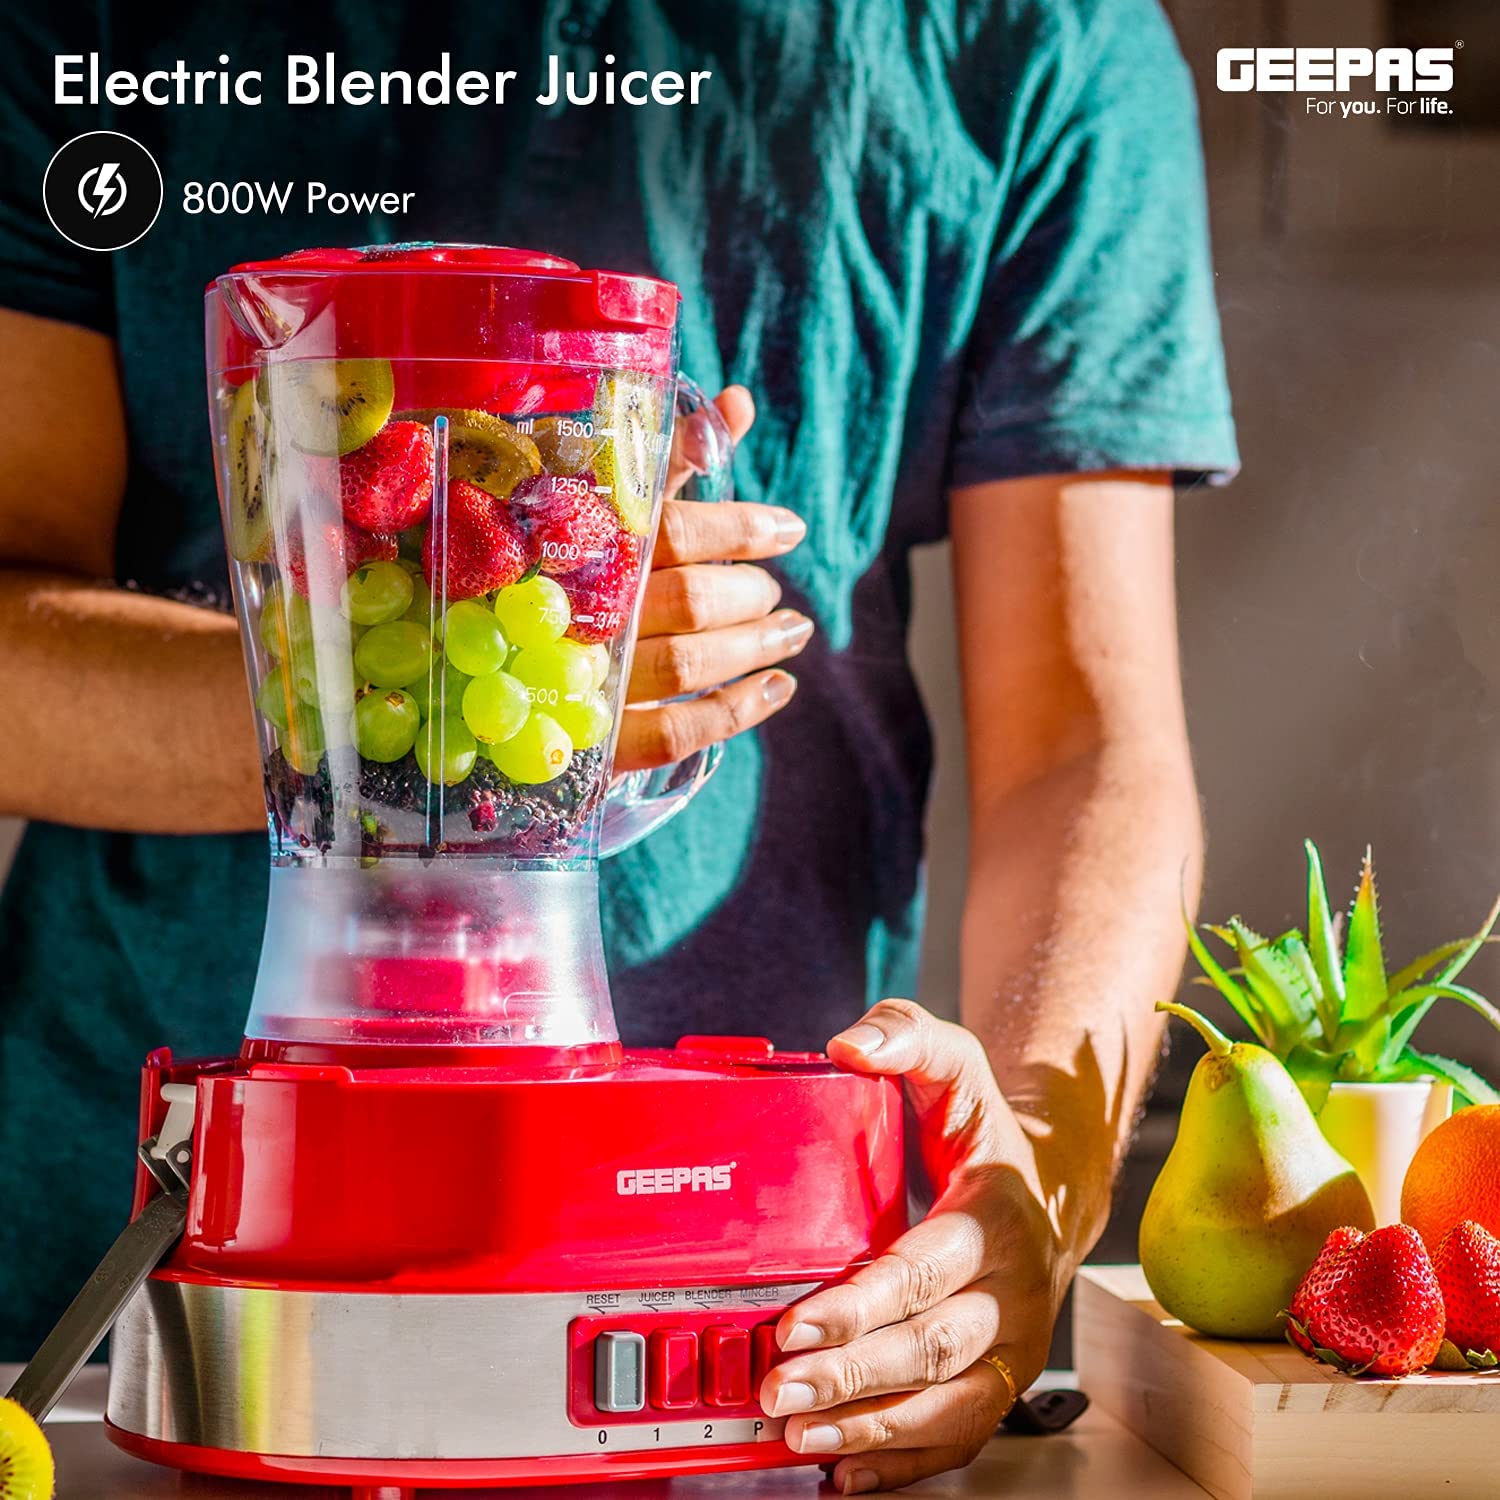 Geepas 4-In-1 Multi-Function Food Processor | Electric Blender Juicer, 2-Speed With Pulse Function & Safety Interlock | 800W |Juicer, Blender, Mixture & Coffee Mill Included- Assorted